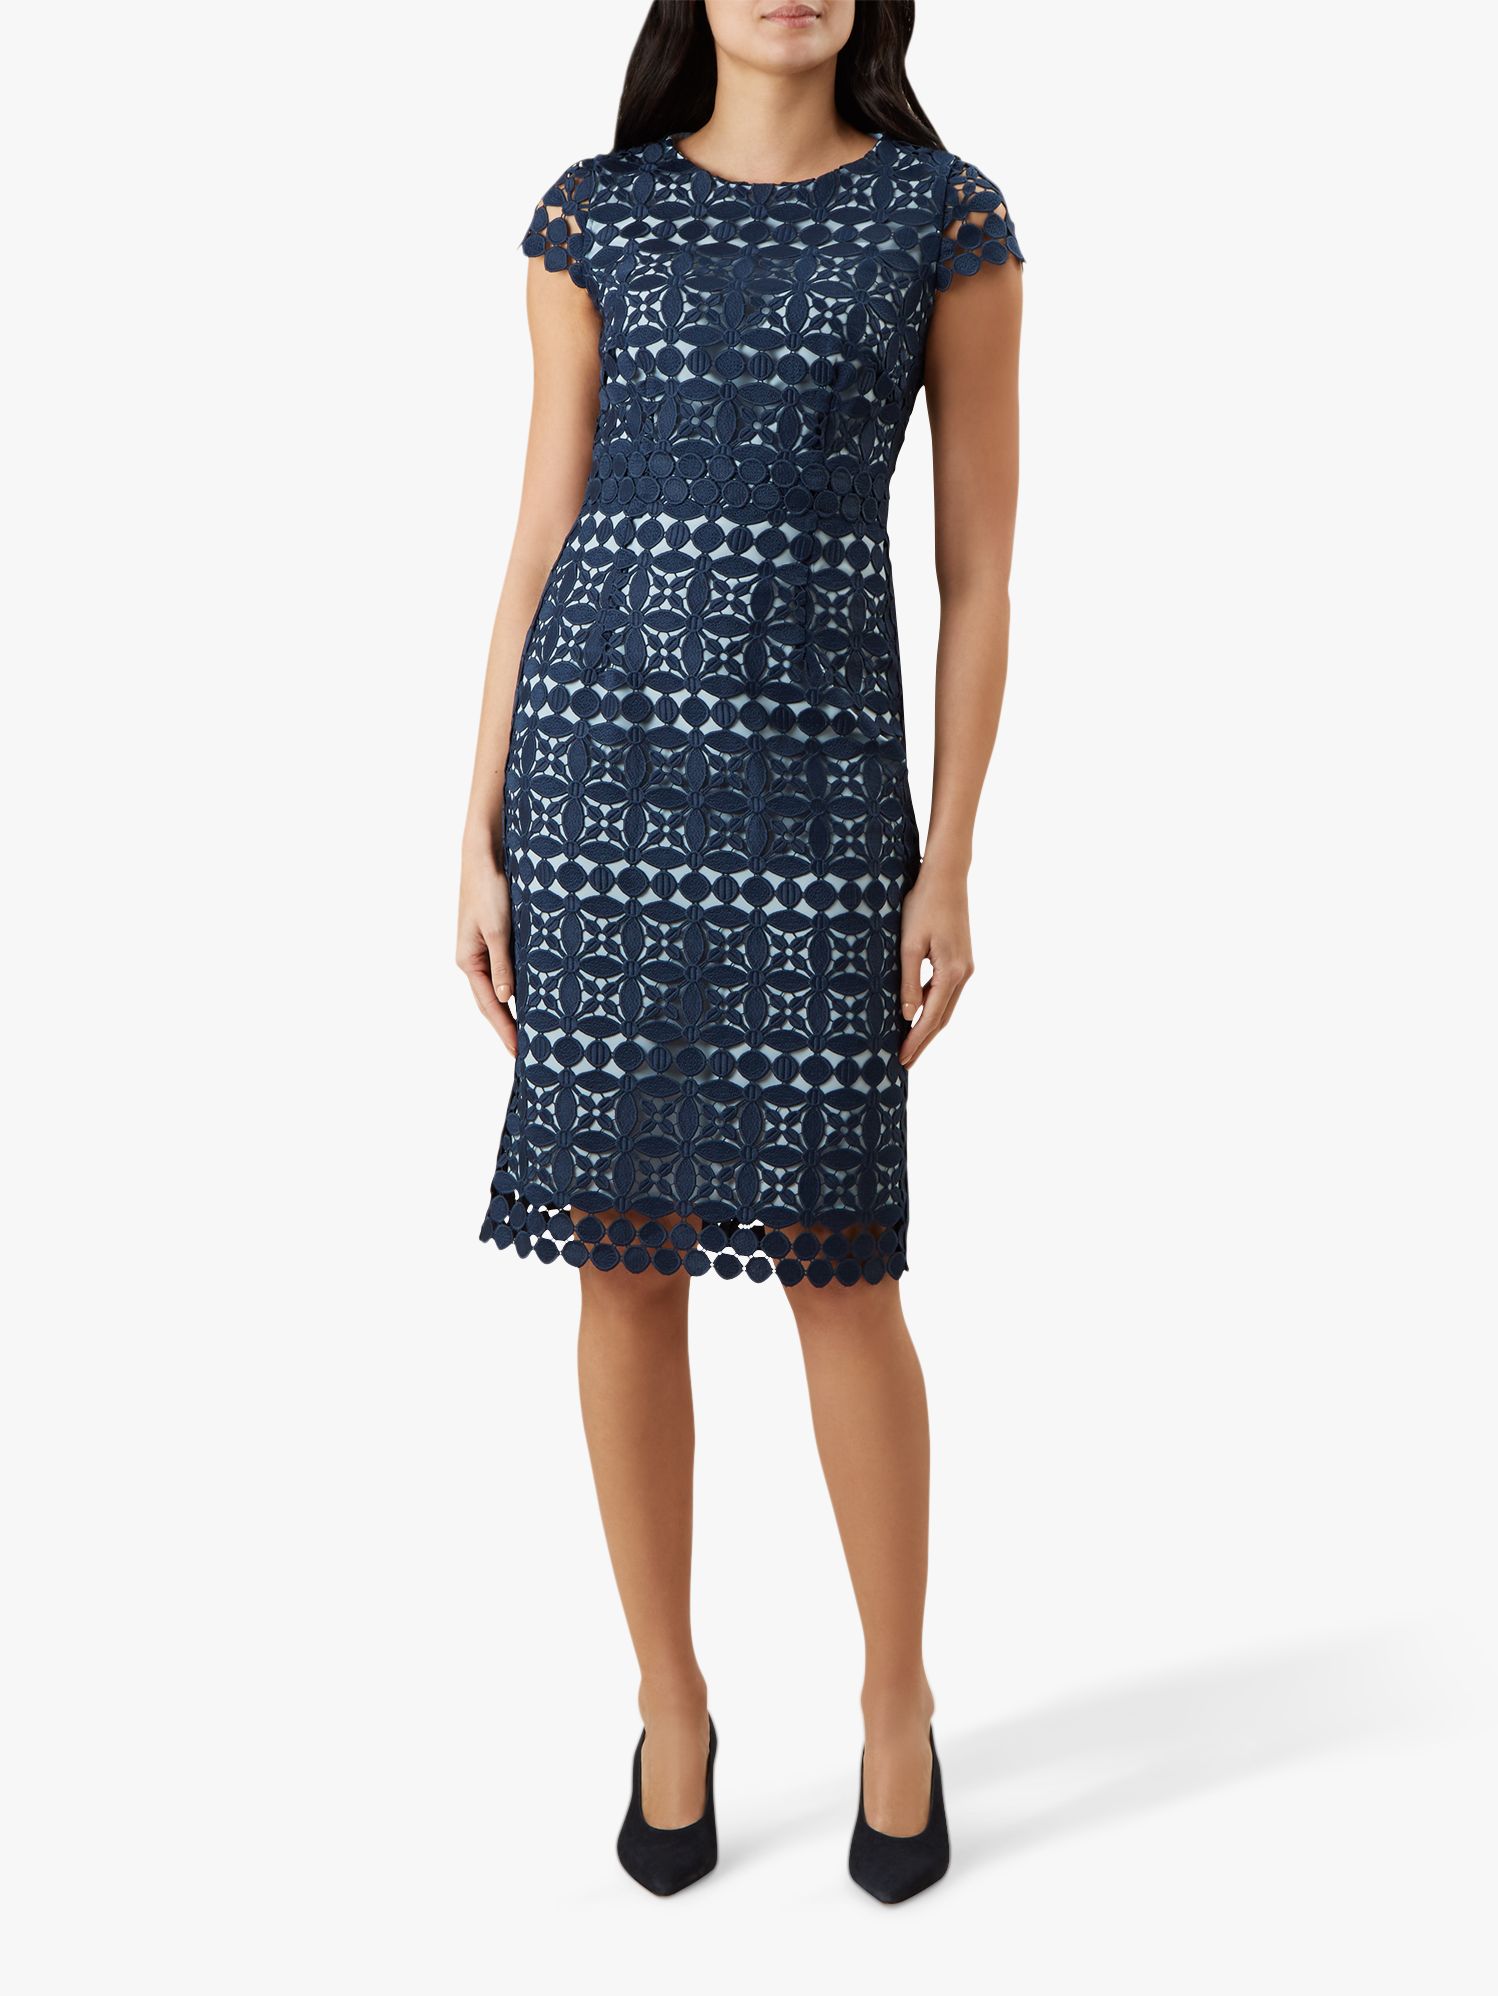 Hobbs Mabelle Lace Dress, Midnight